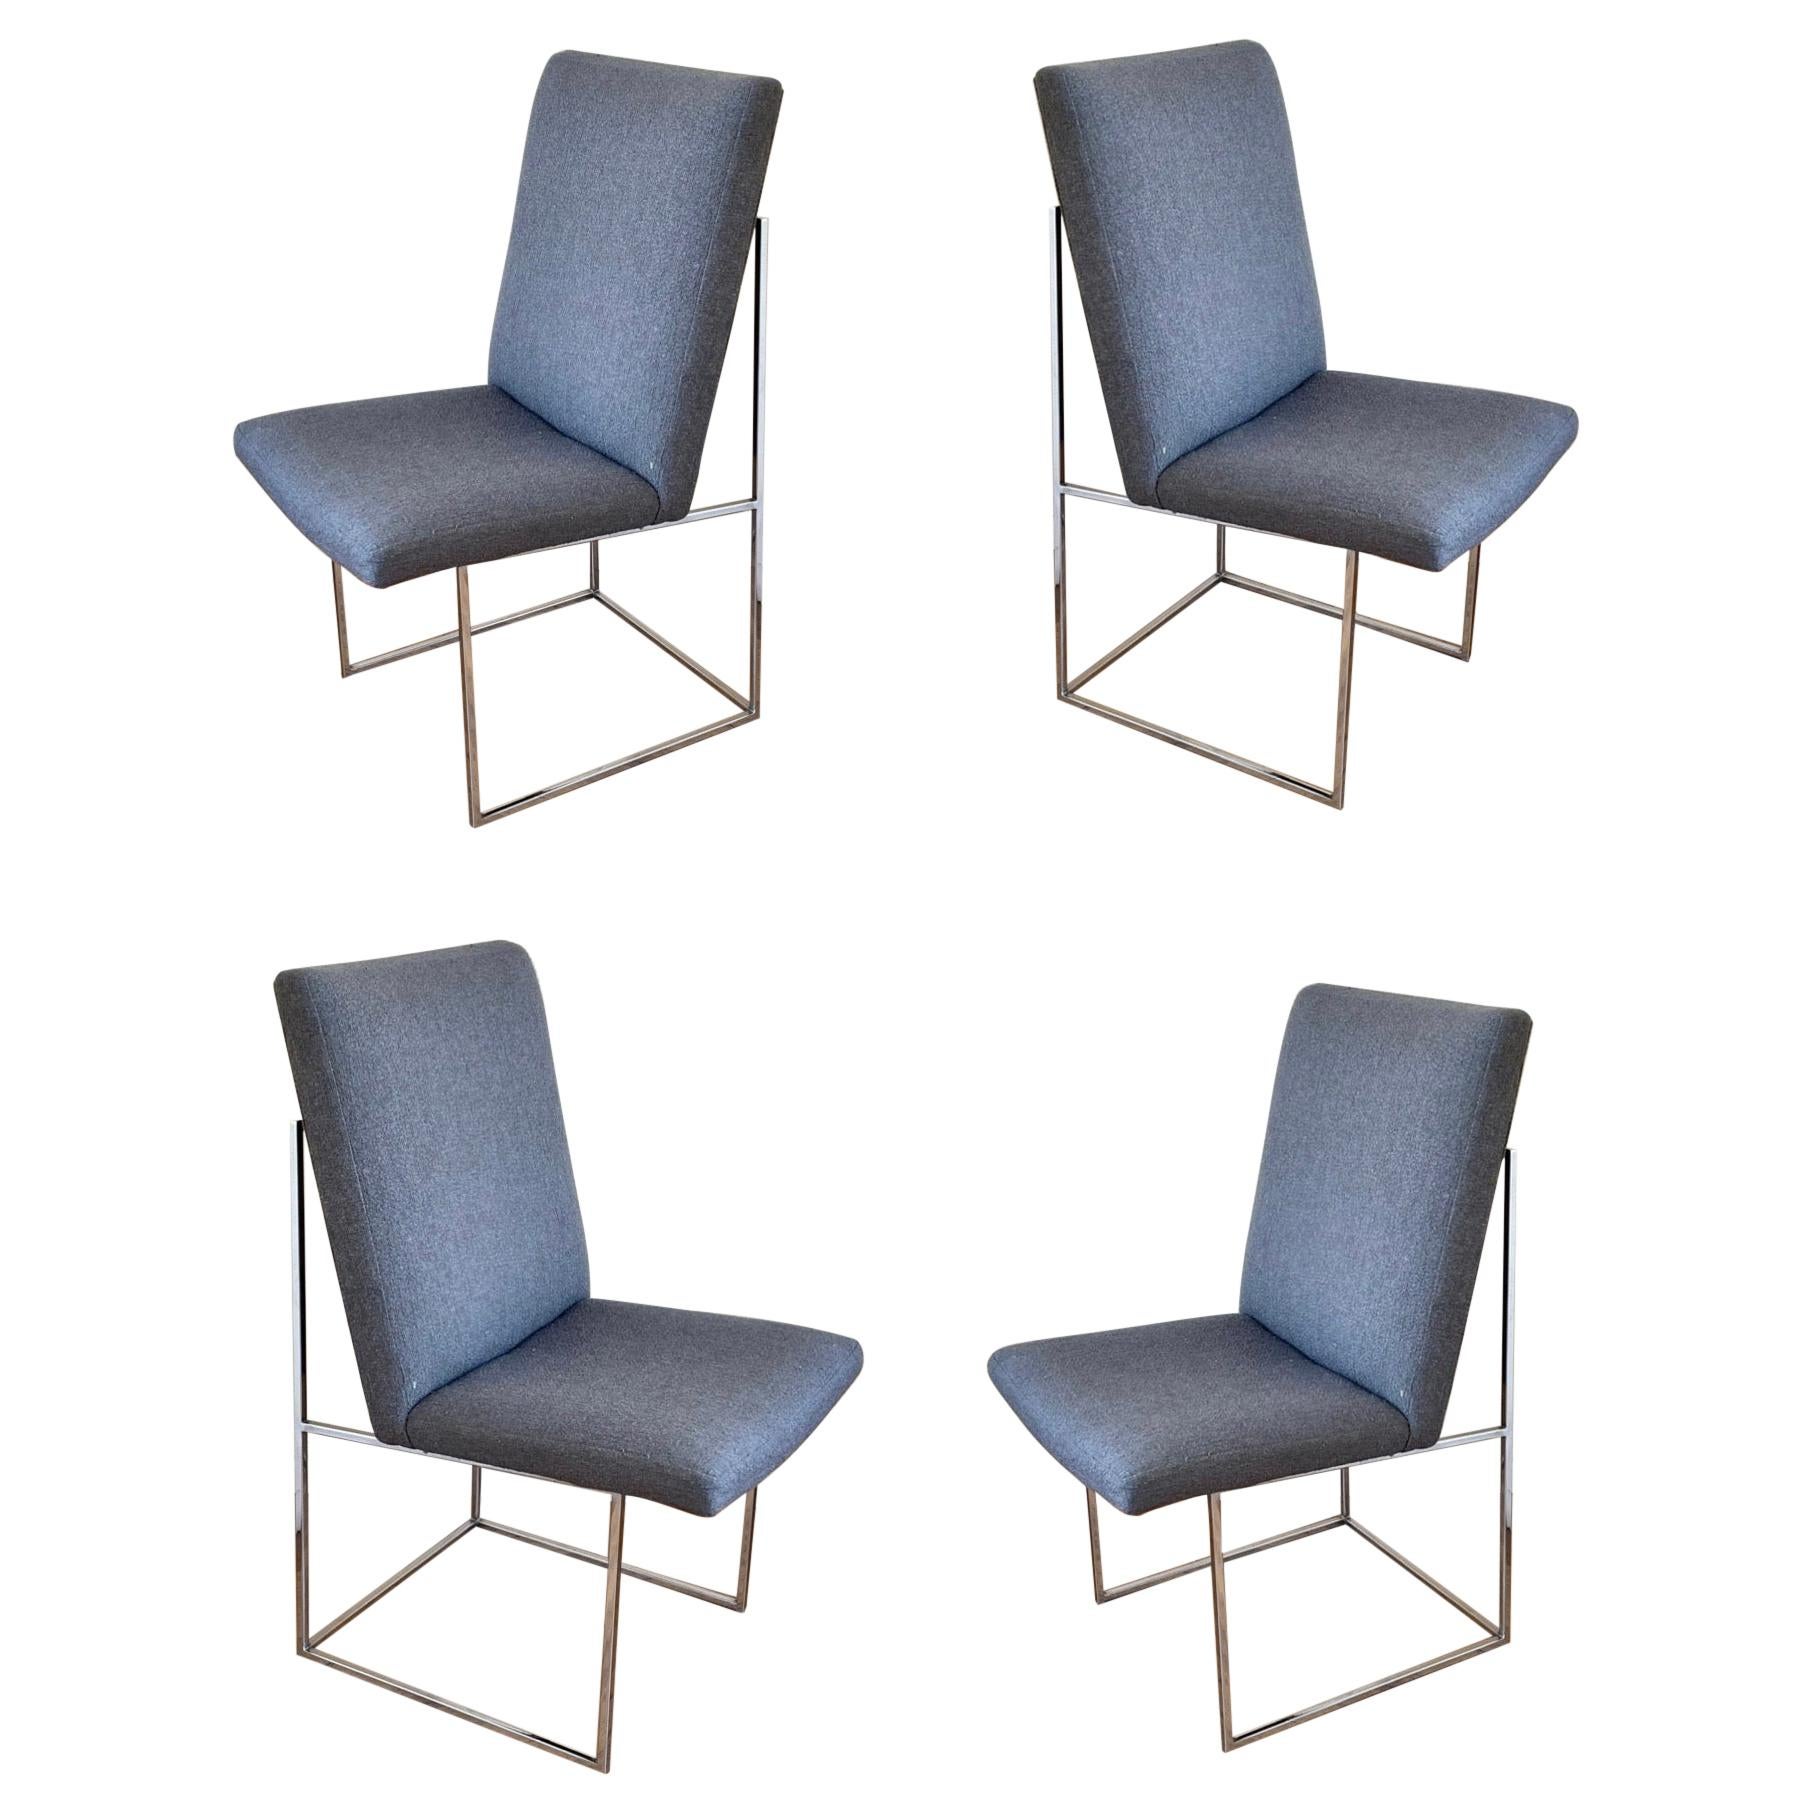 Set of 4 Dining Chairs Designed by Milo Baughman